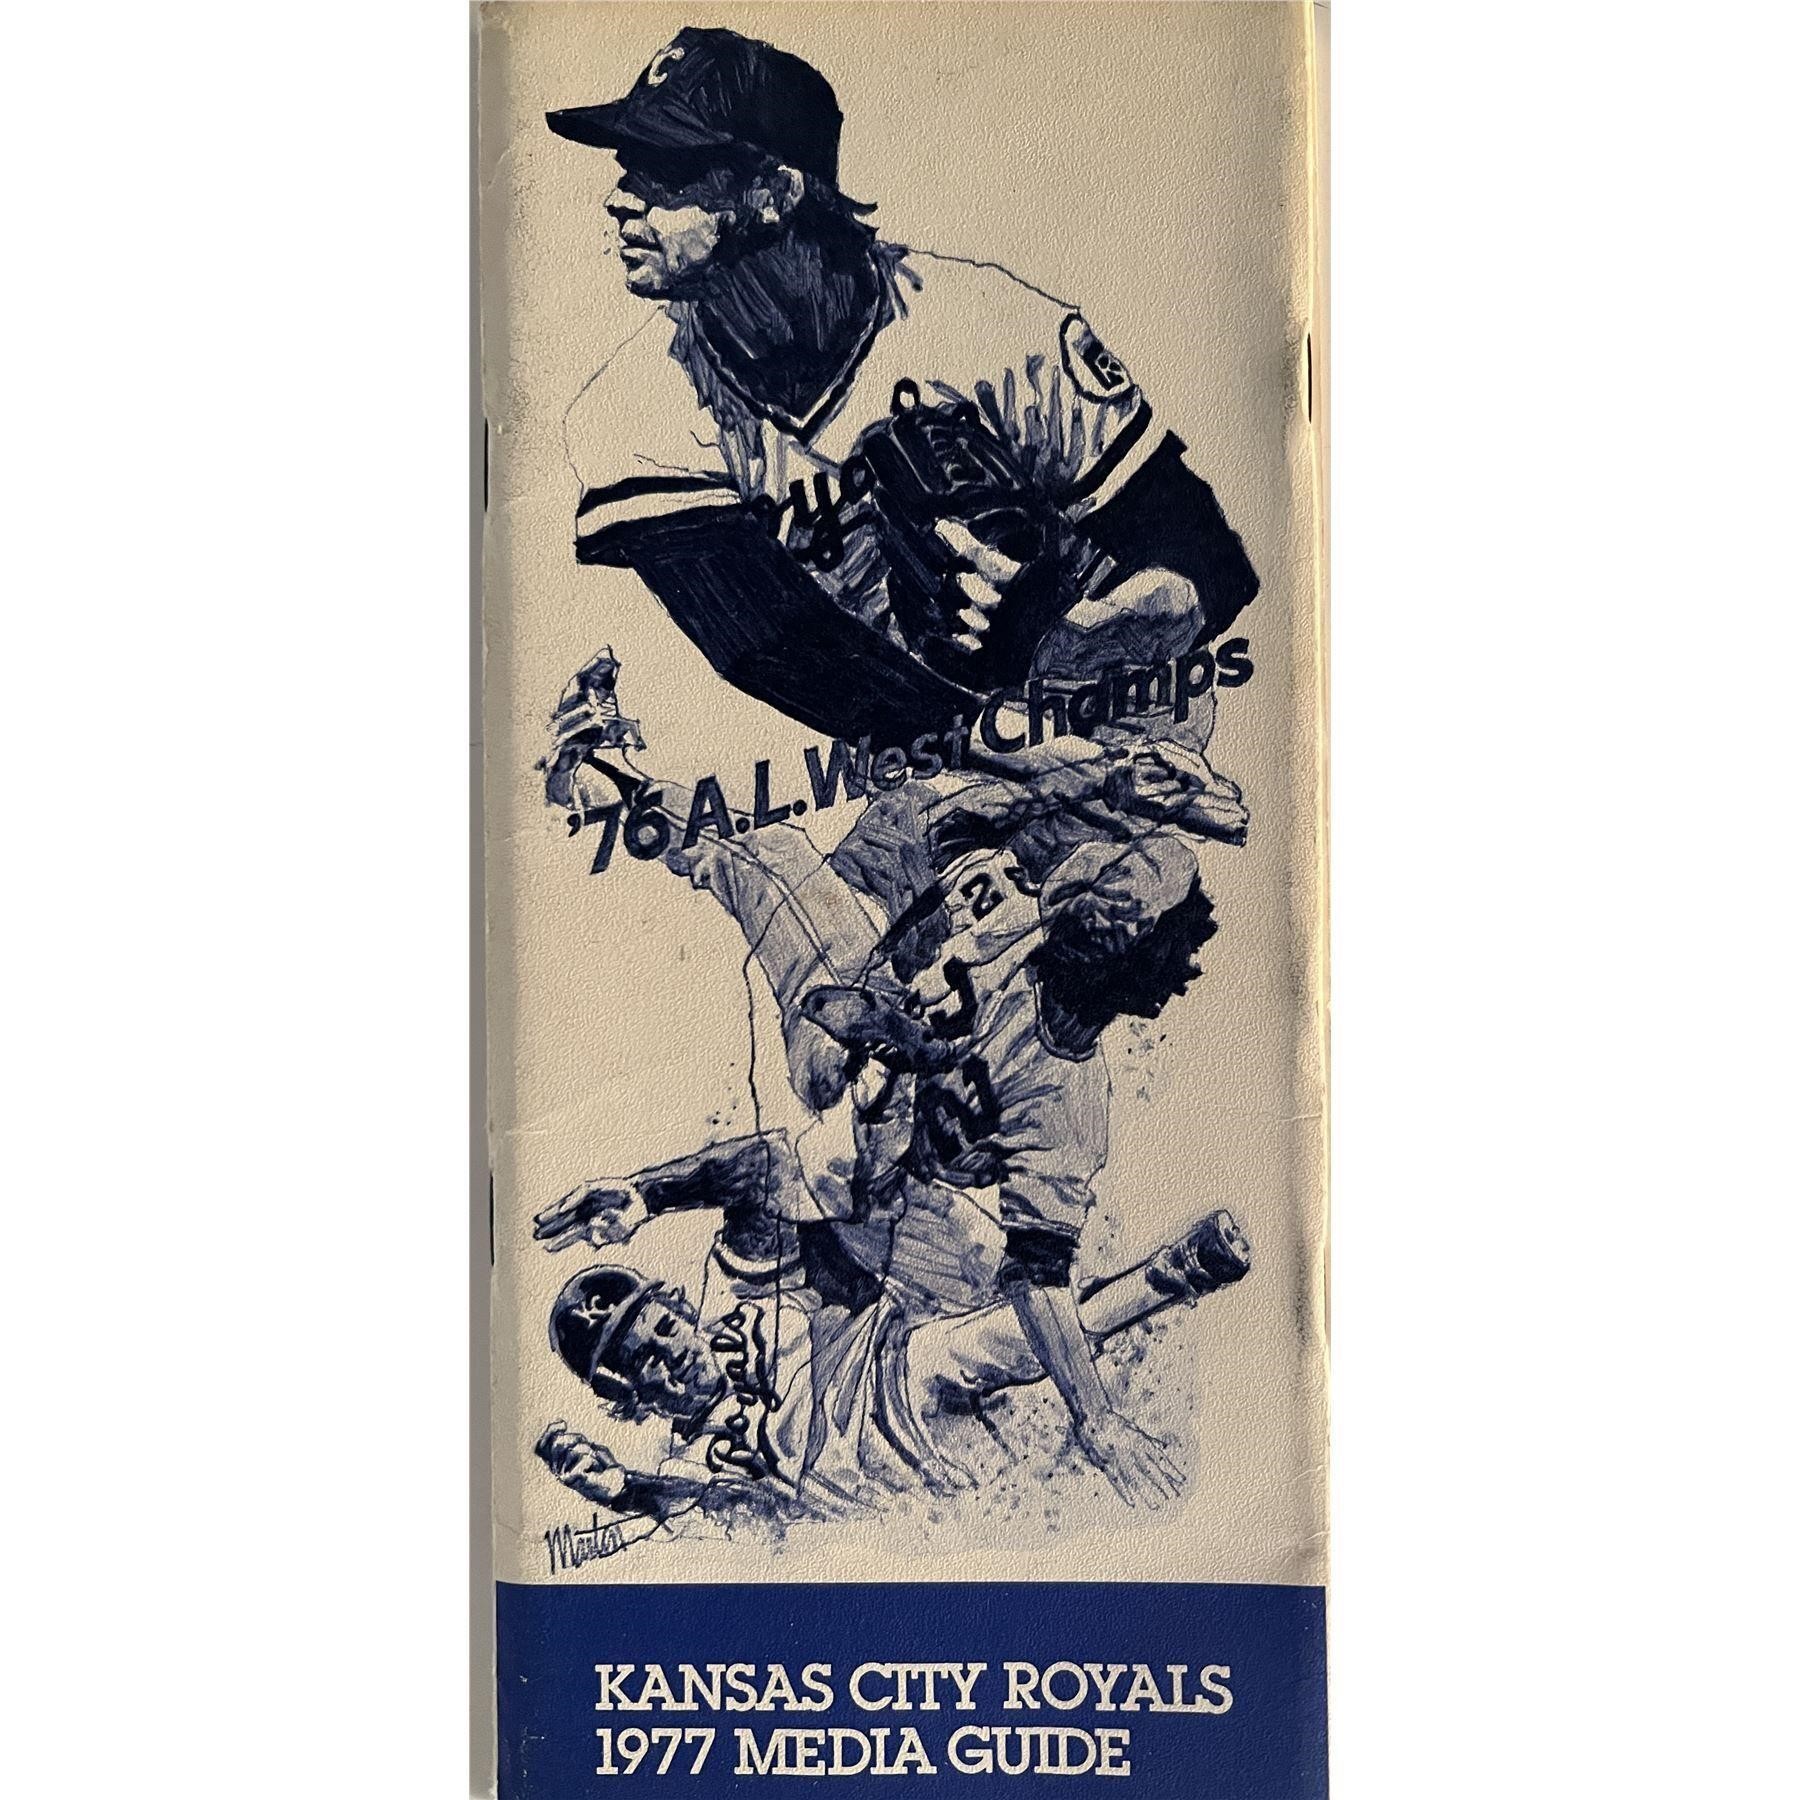 1977 Royals Media guide. 4x9 inches